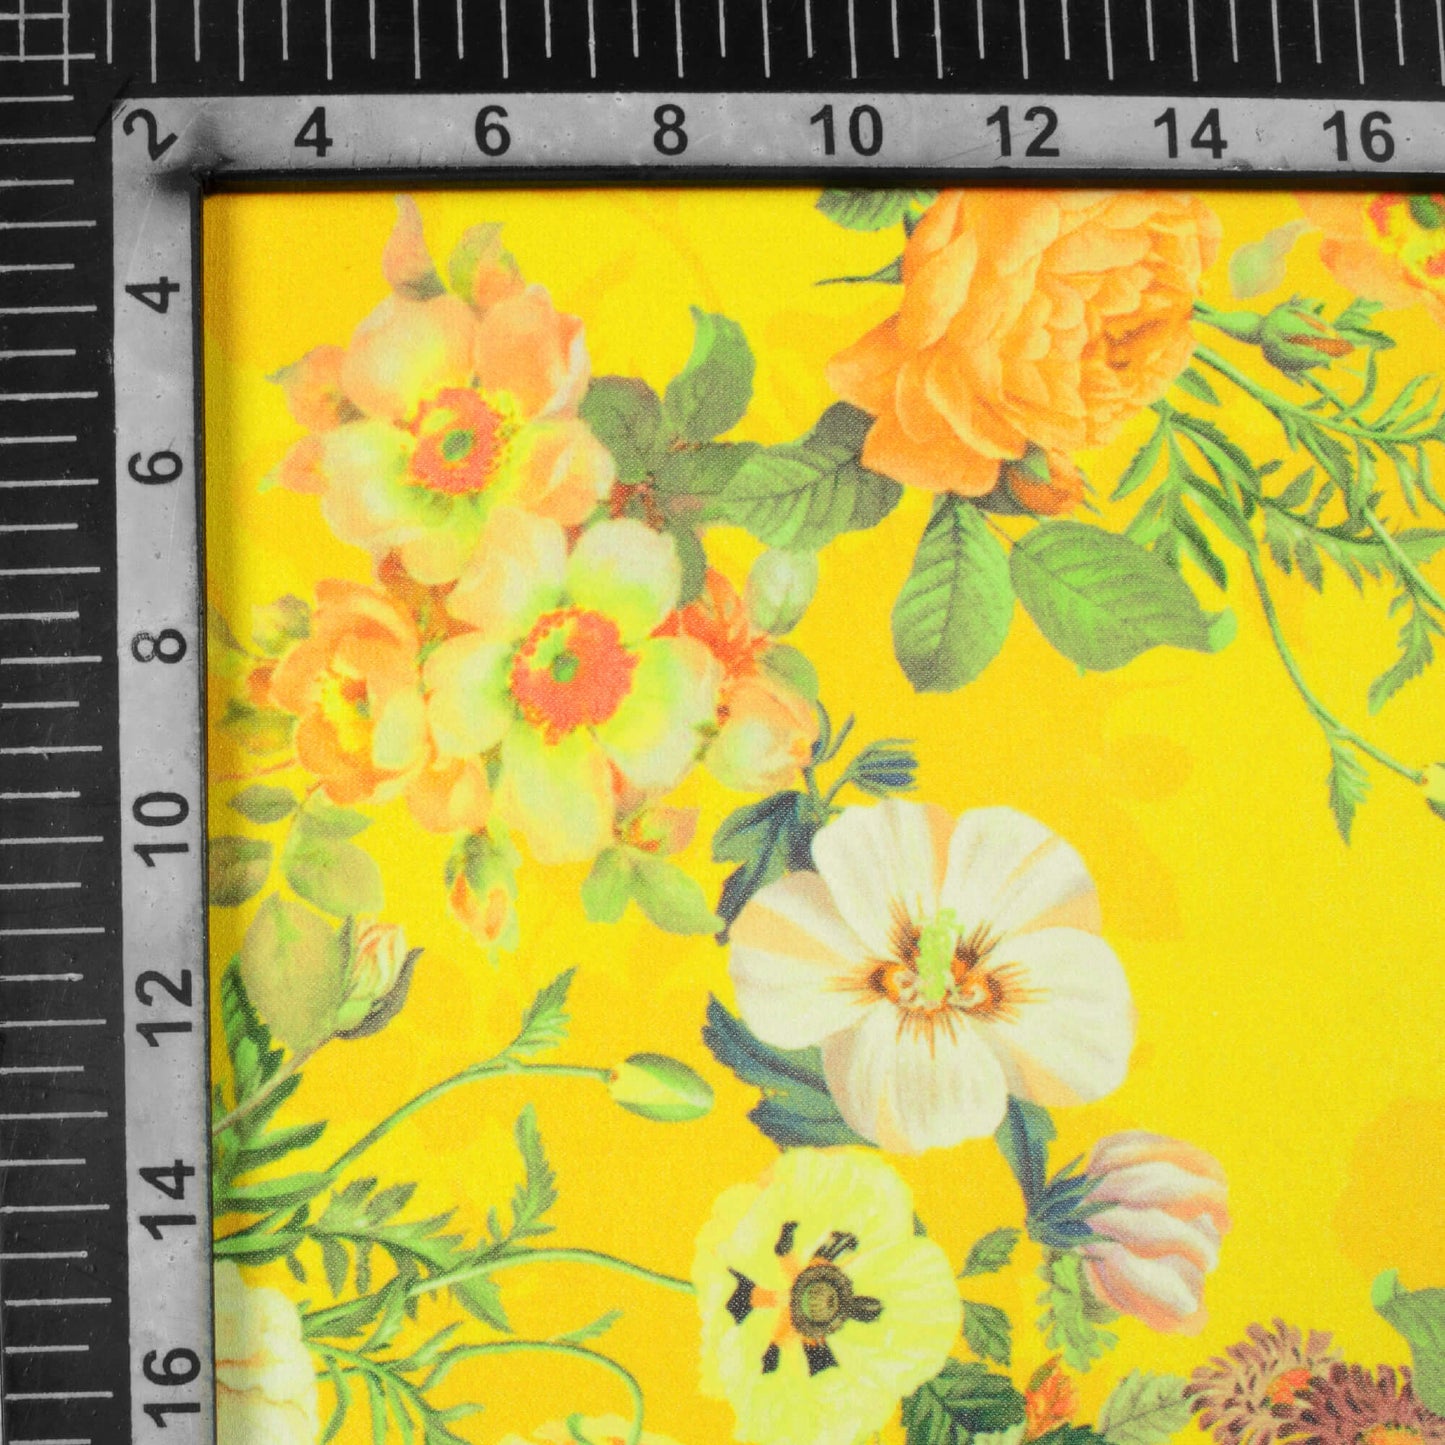 Bright Yellow And Peach Floral Pattern Digital Print Georgette Fabric